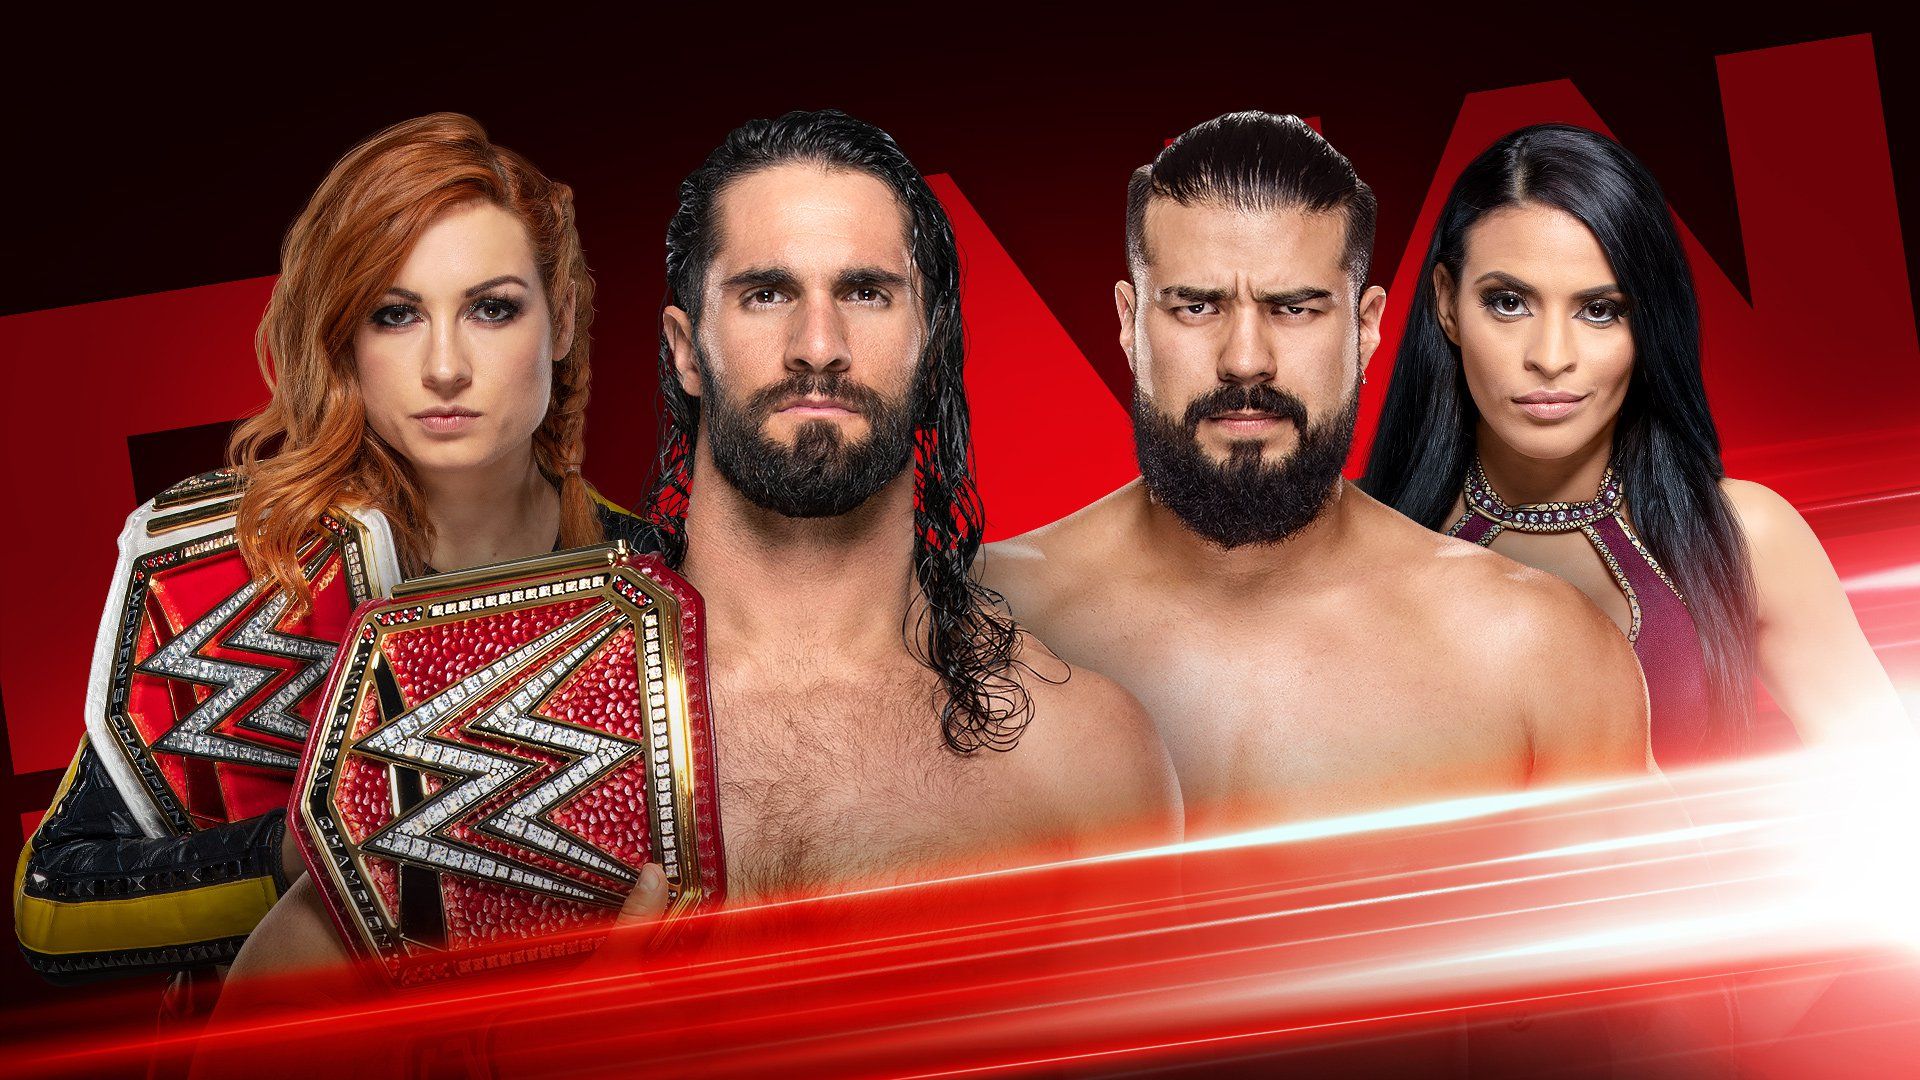 WWE MONDAY NIGHT RAW Highlights For July 2019: Seth Rollins